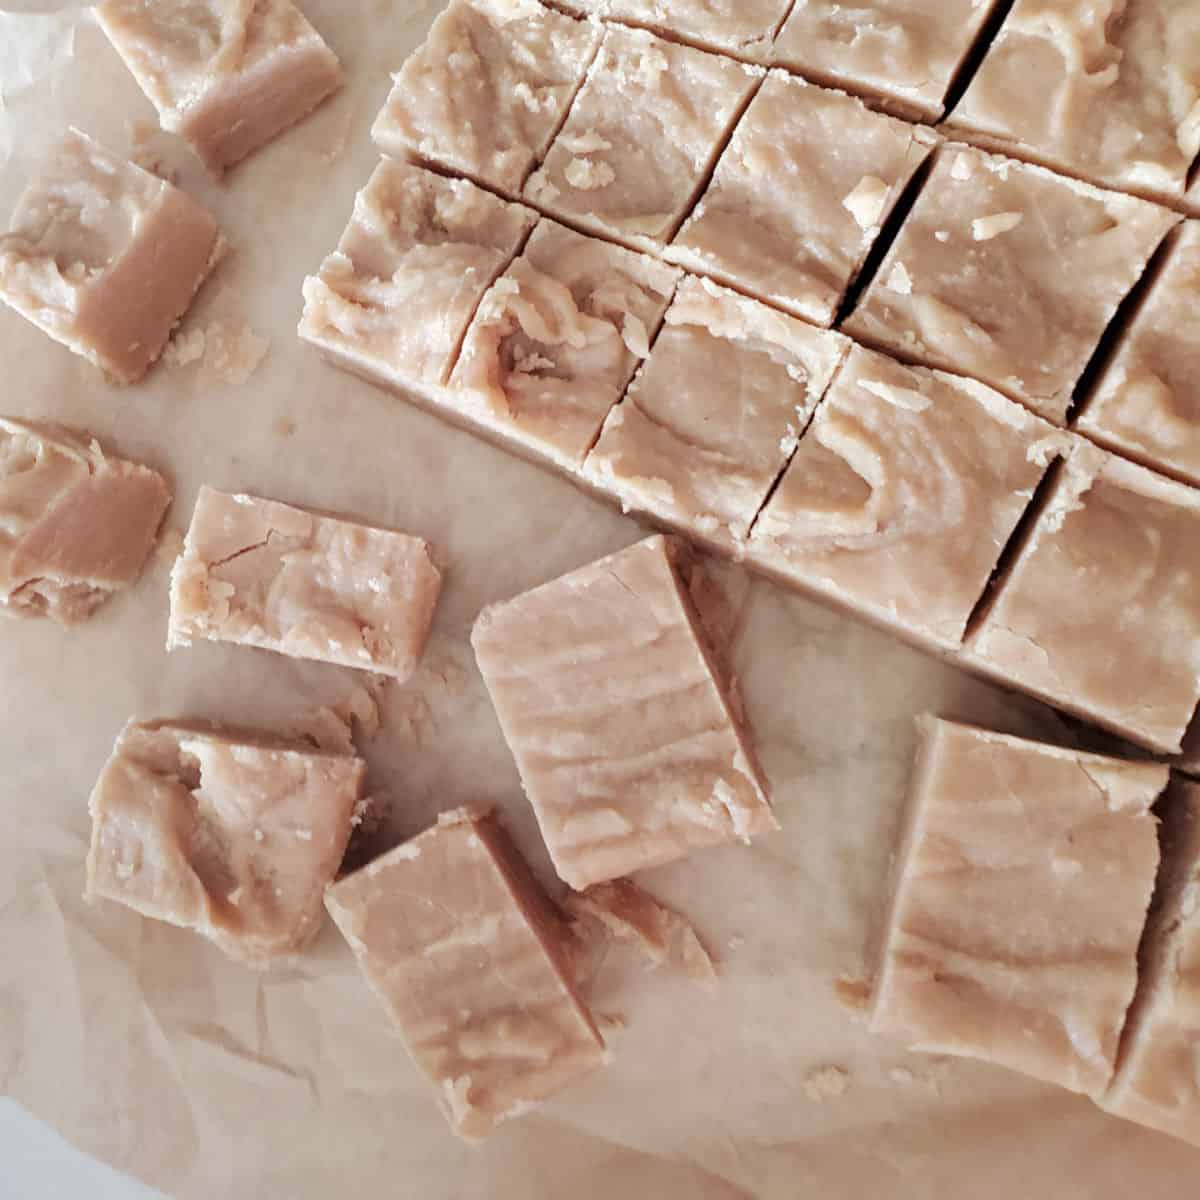 Easy 2 Ingredient Peanut Butter Fudge (with video)